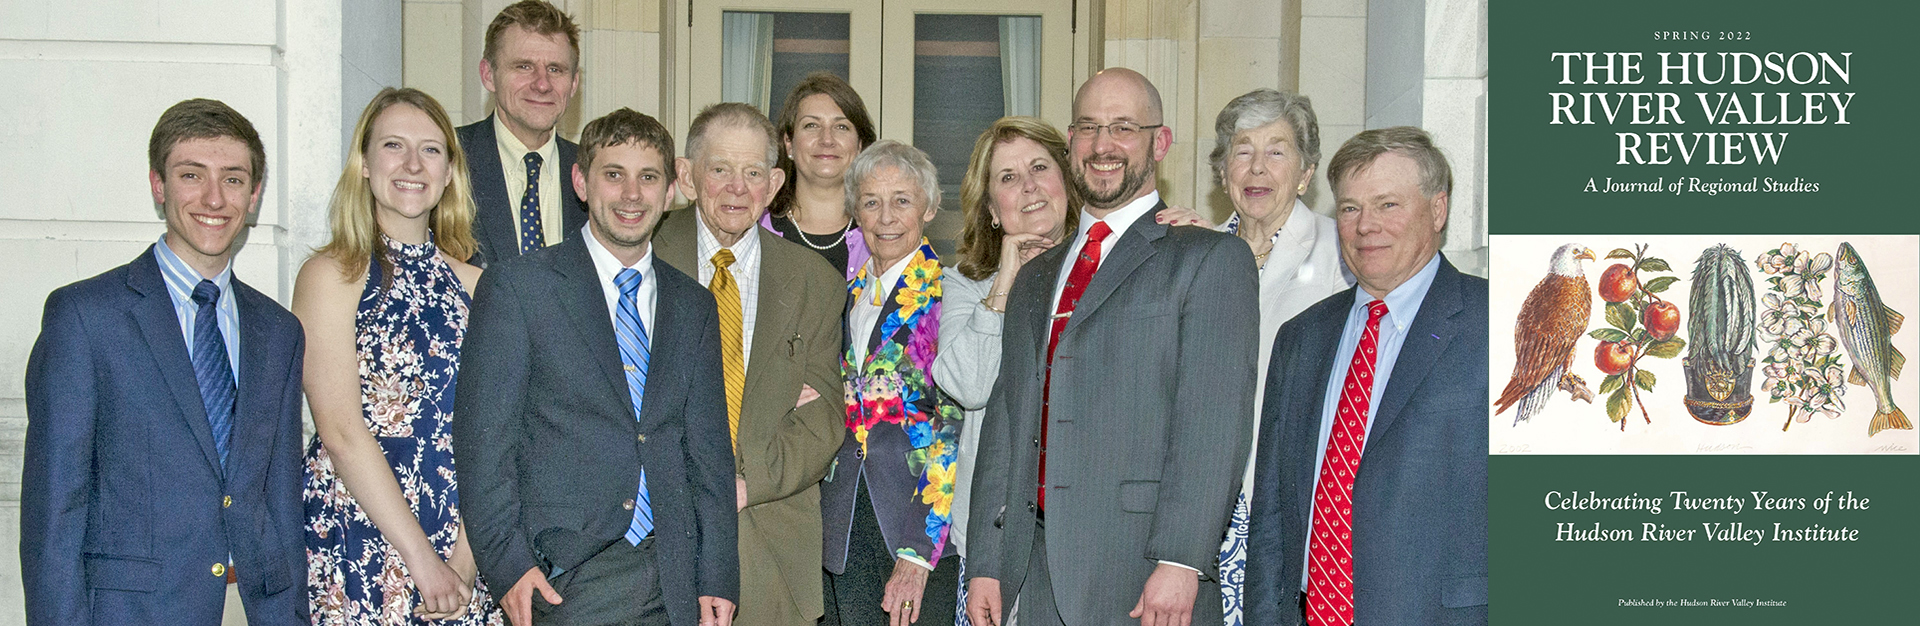 photo of HRVI staff and associates at a formal event, overlaid with an image of the cover of the new journal